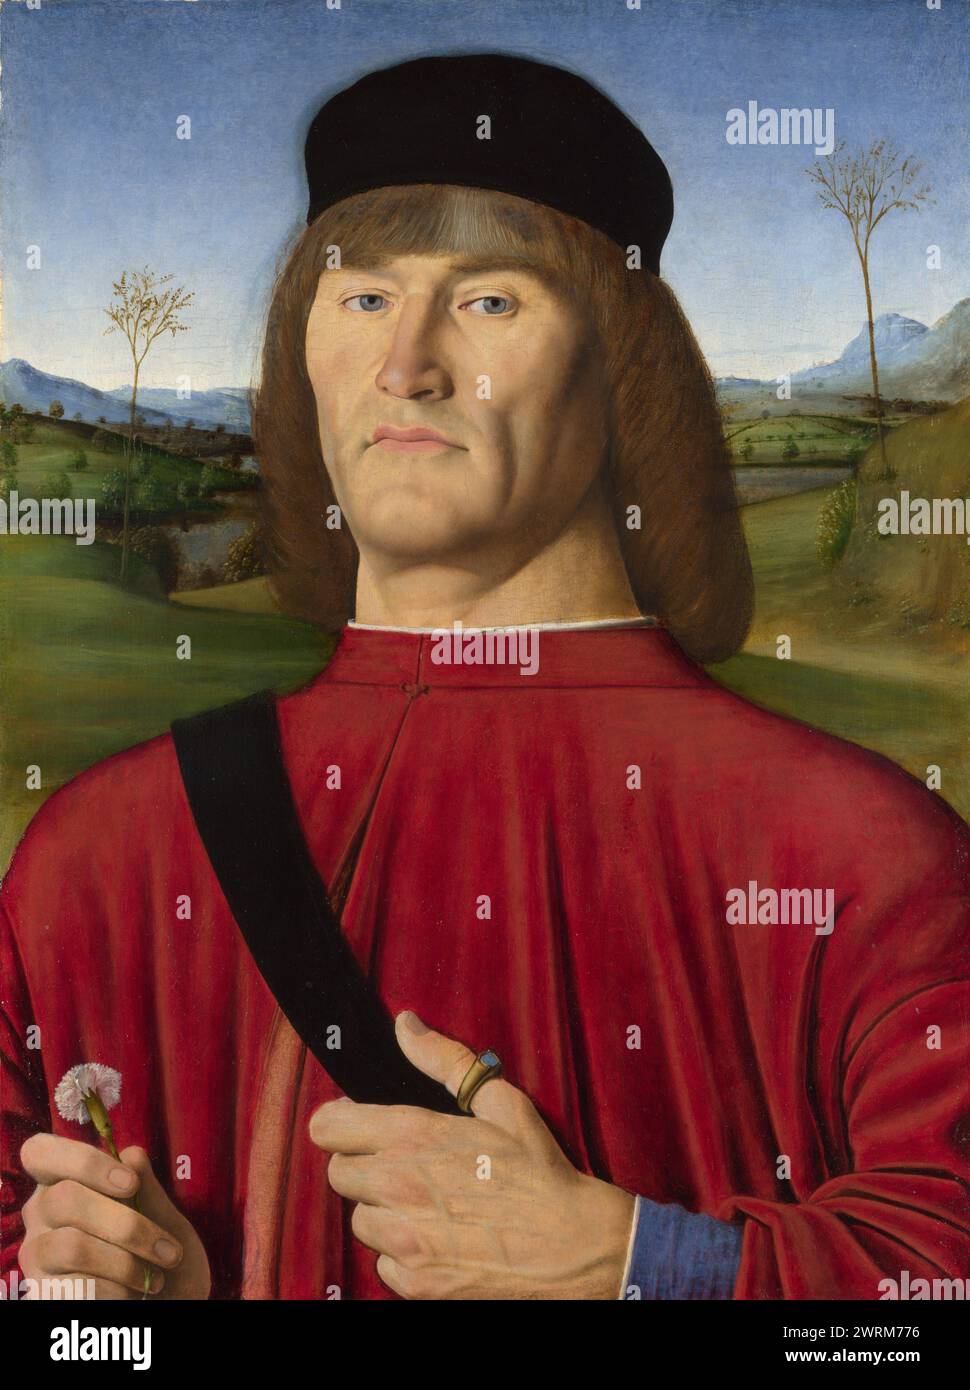 Man with a Pink Carnation, c. 1495 - Oil & egg tempera on poplar; H. 50 cm, W. 39 cm, National Gallery of London Andrea Solari Stock Photo